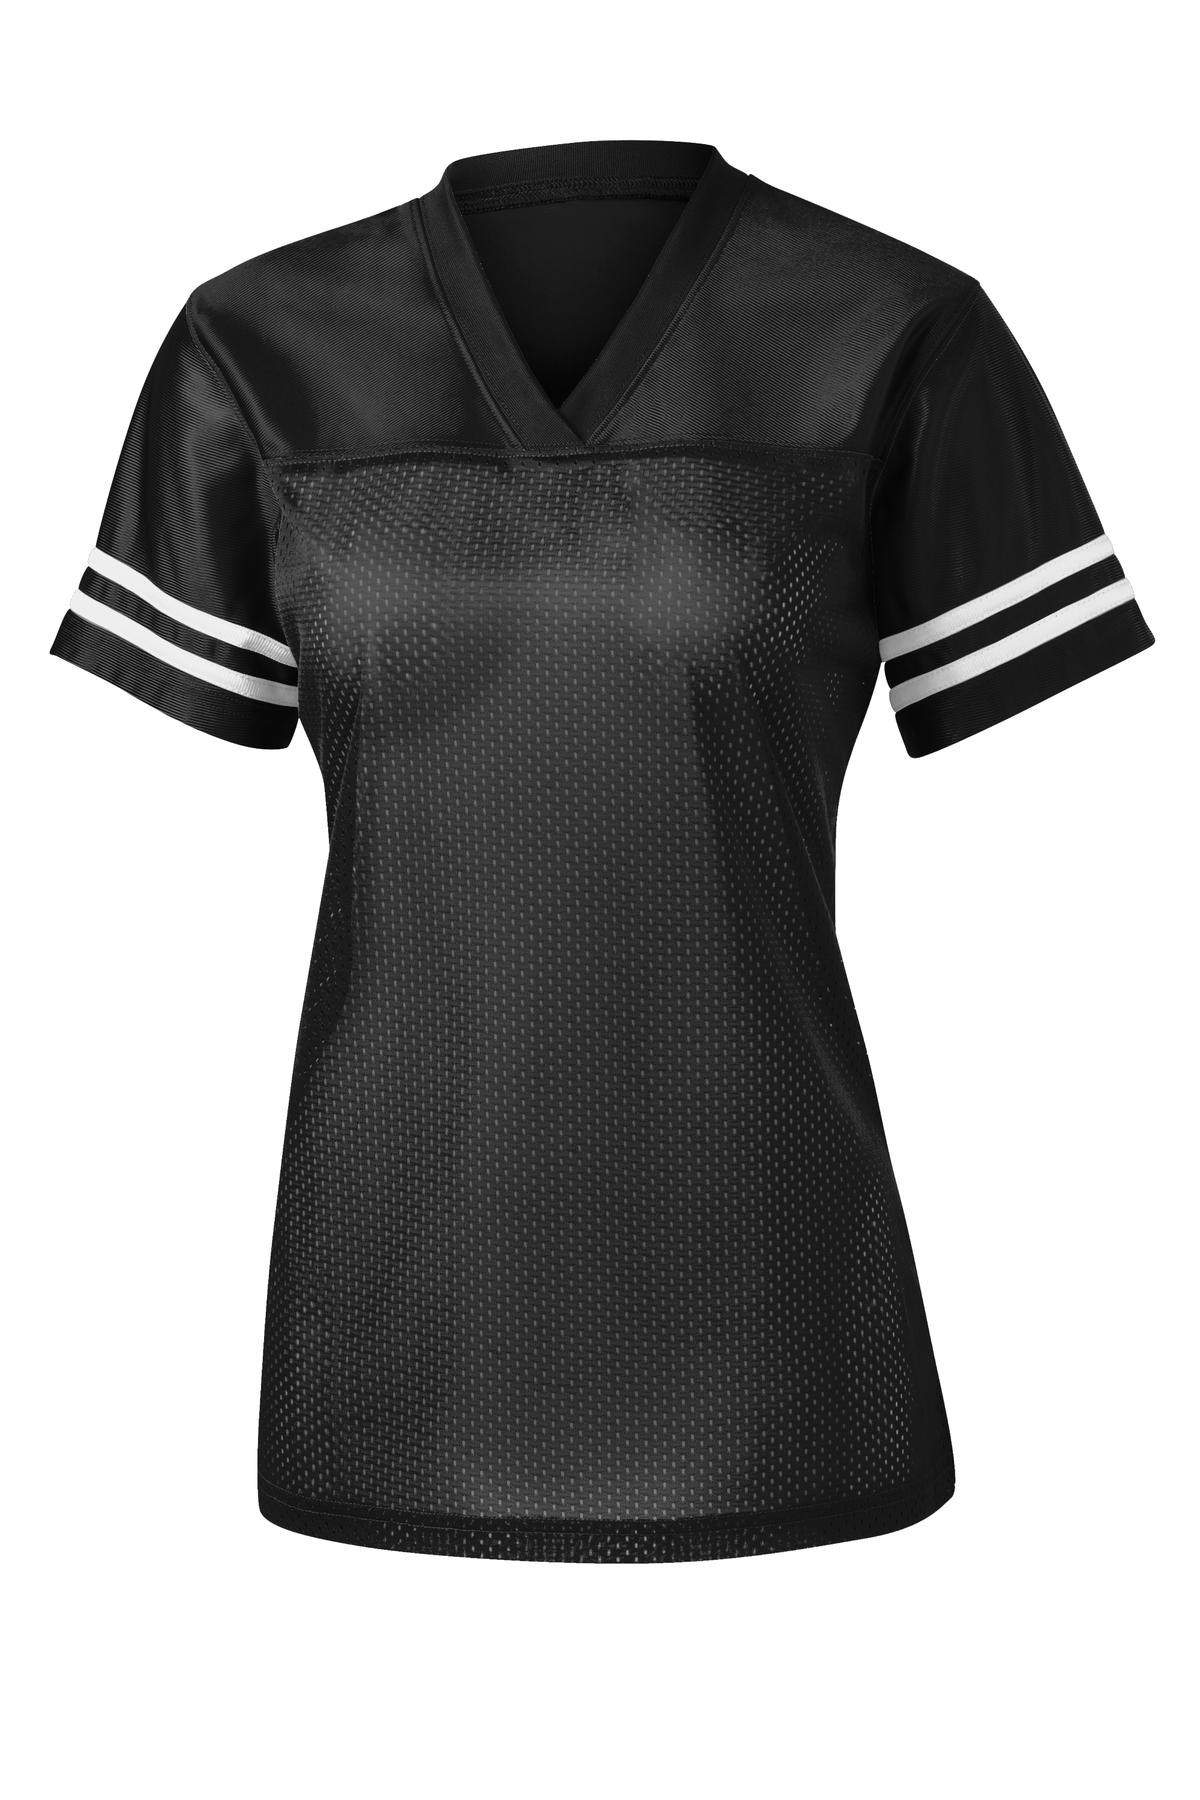 Sport-Tek ® Ladies PosiCharge ® Replica Jersey. LST307 Questions & Answers